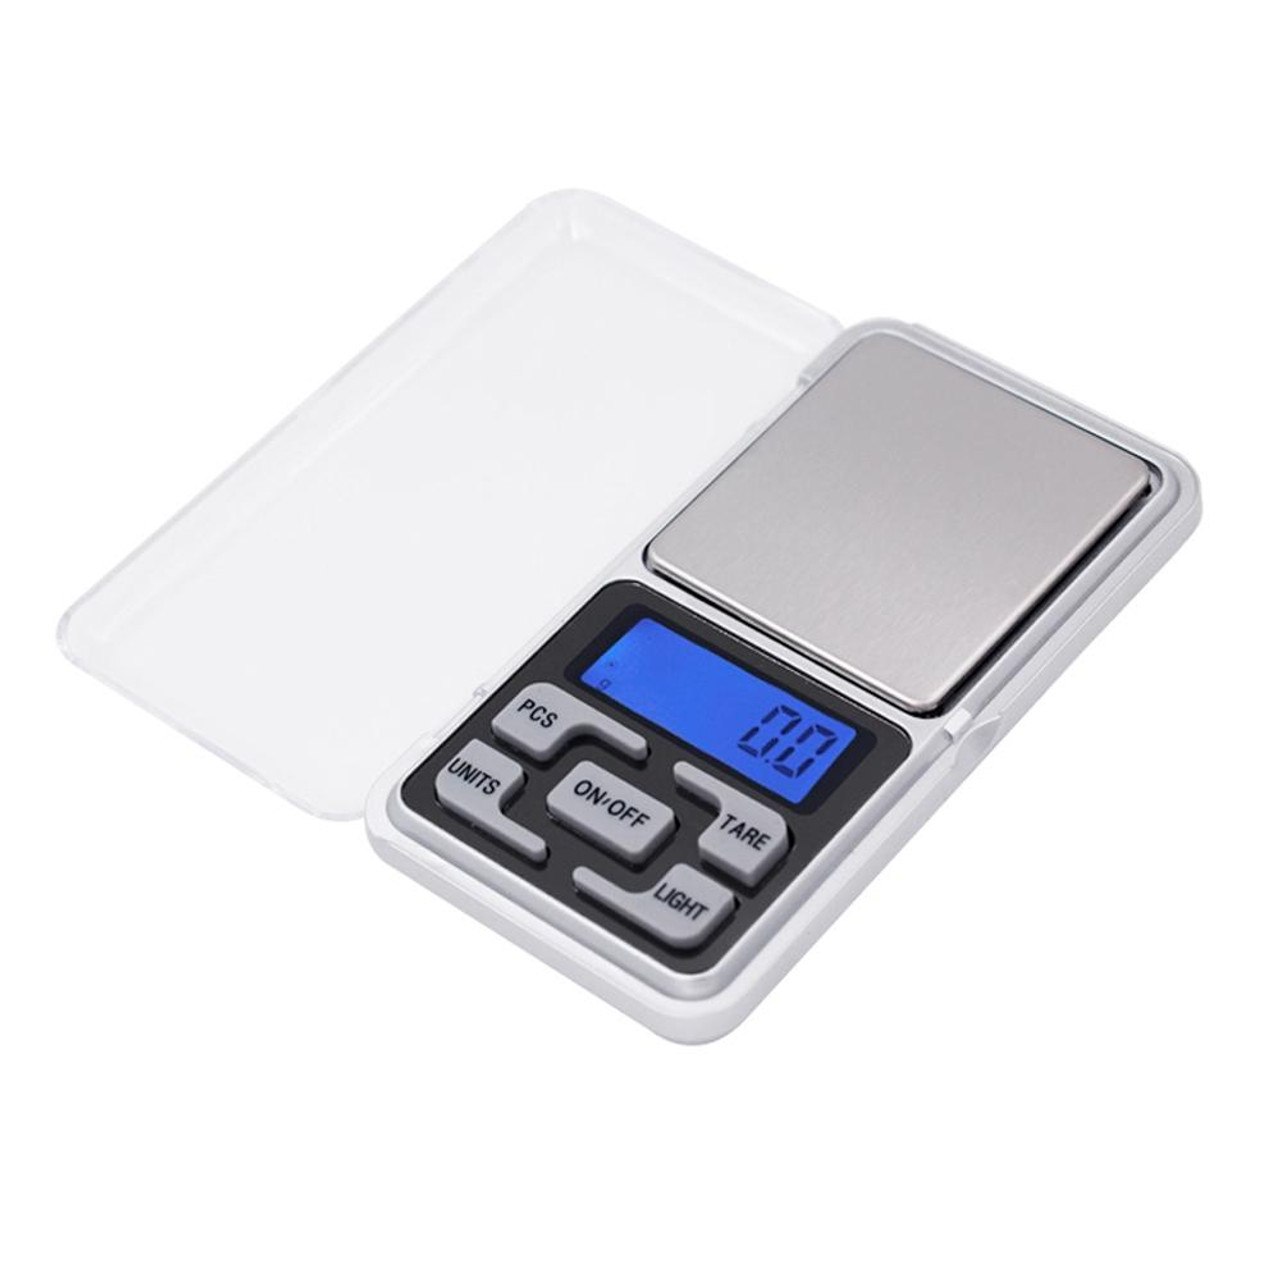 Digital Scale 500g x 0.01g for Precision Weighing & Counting - USB Wall  Adapter NEW, 1 unit - Baker's